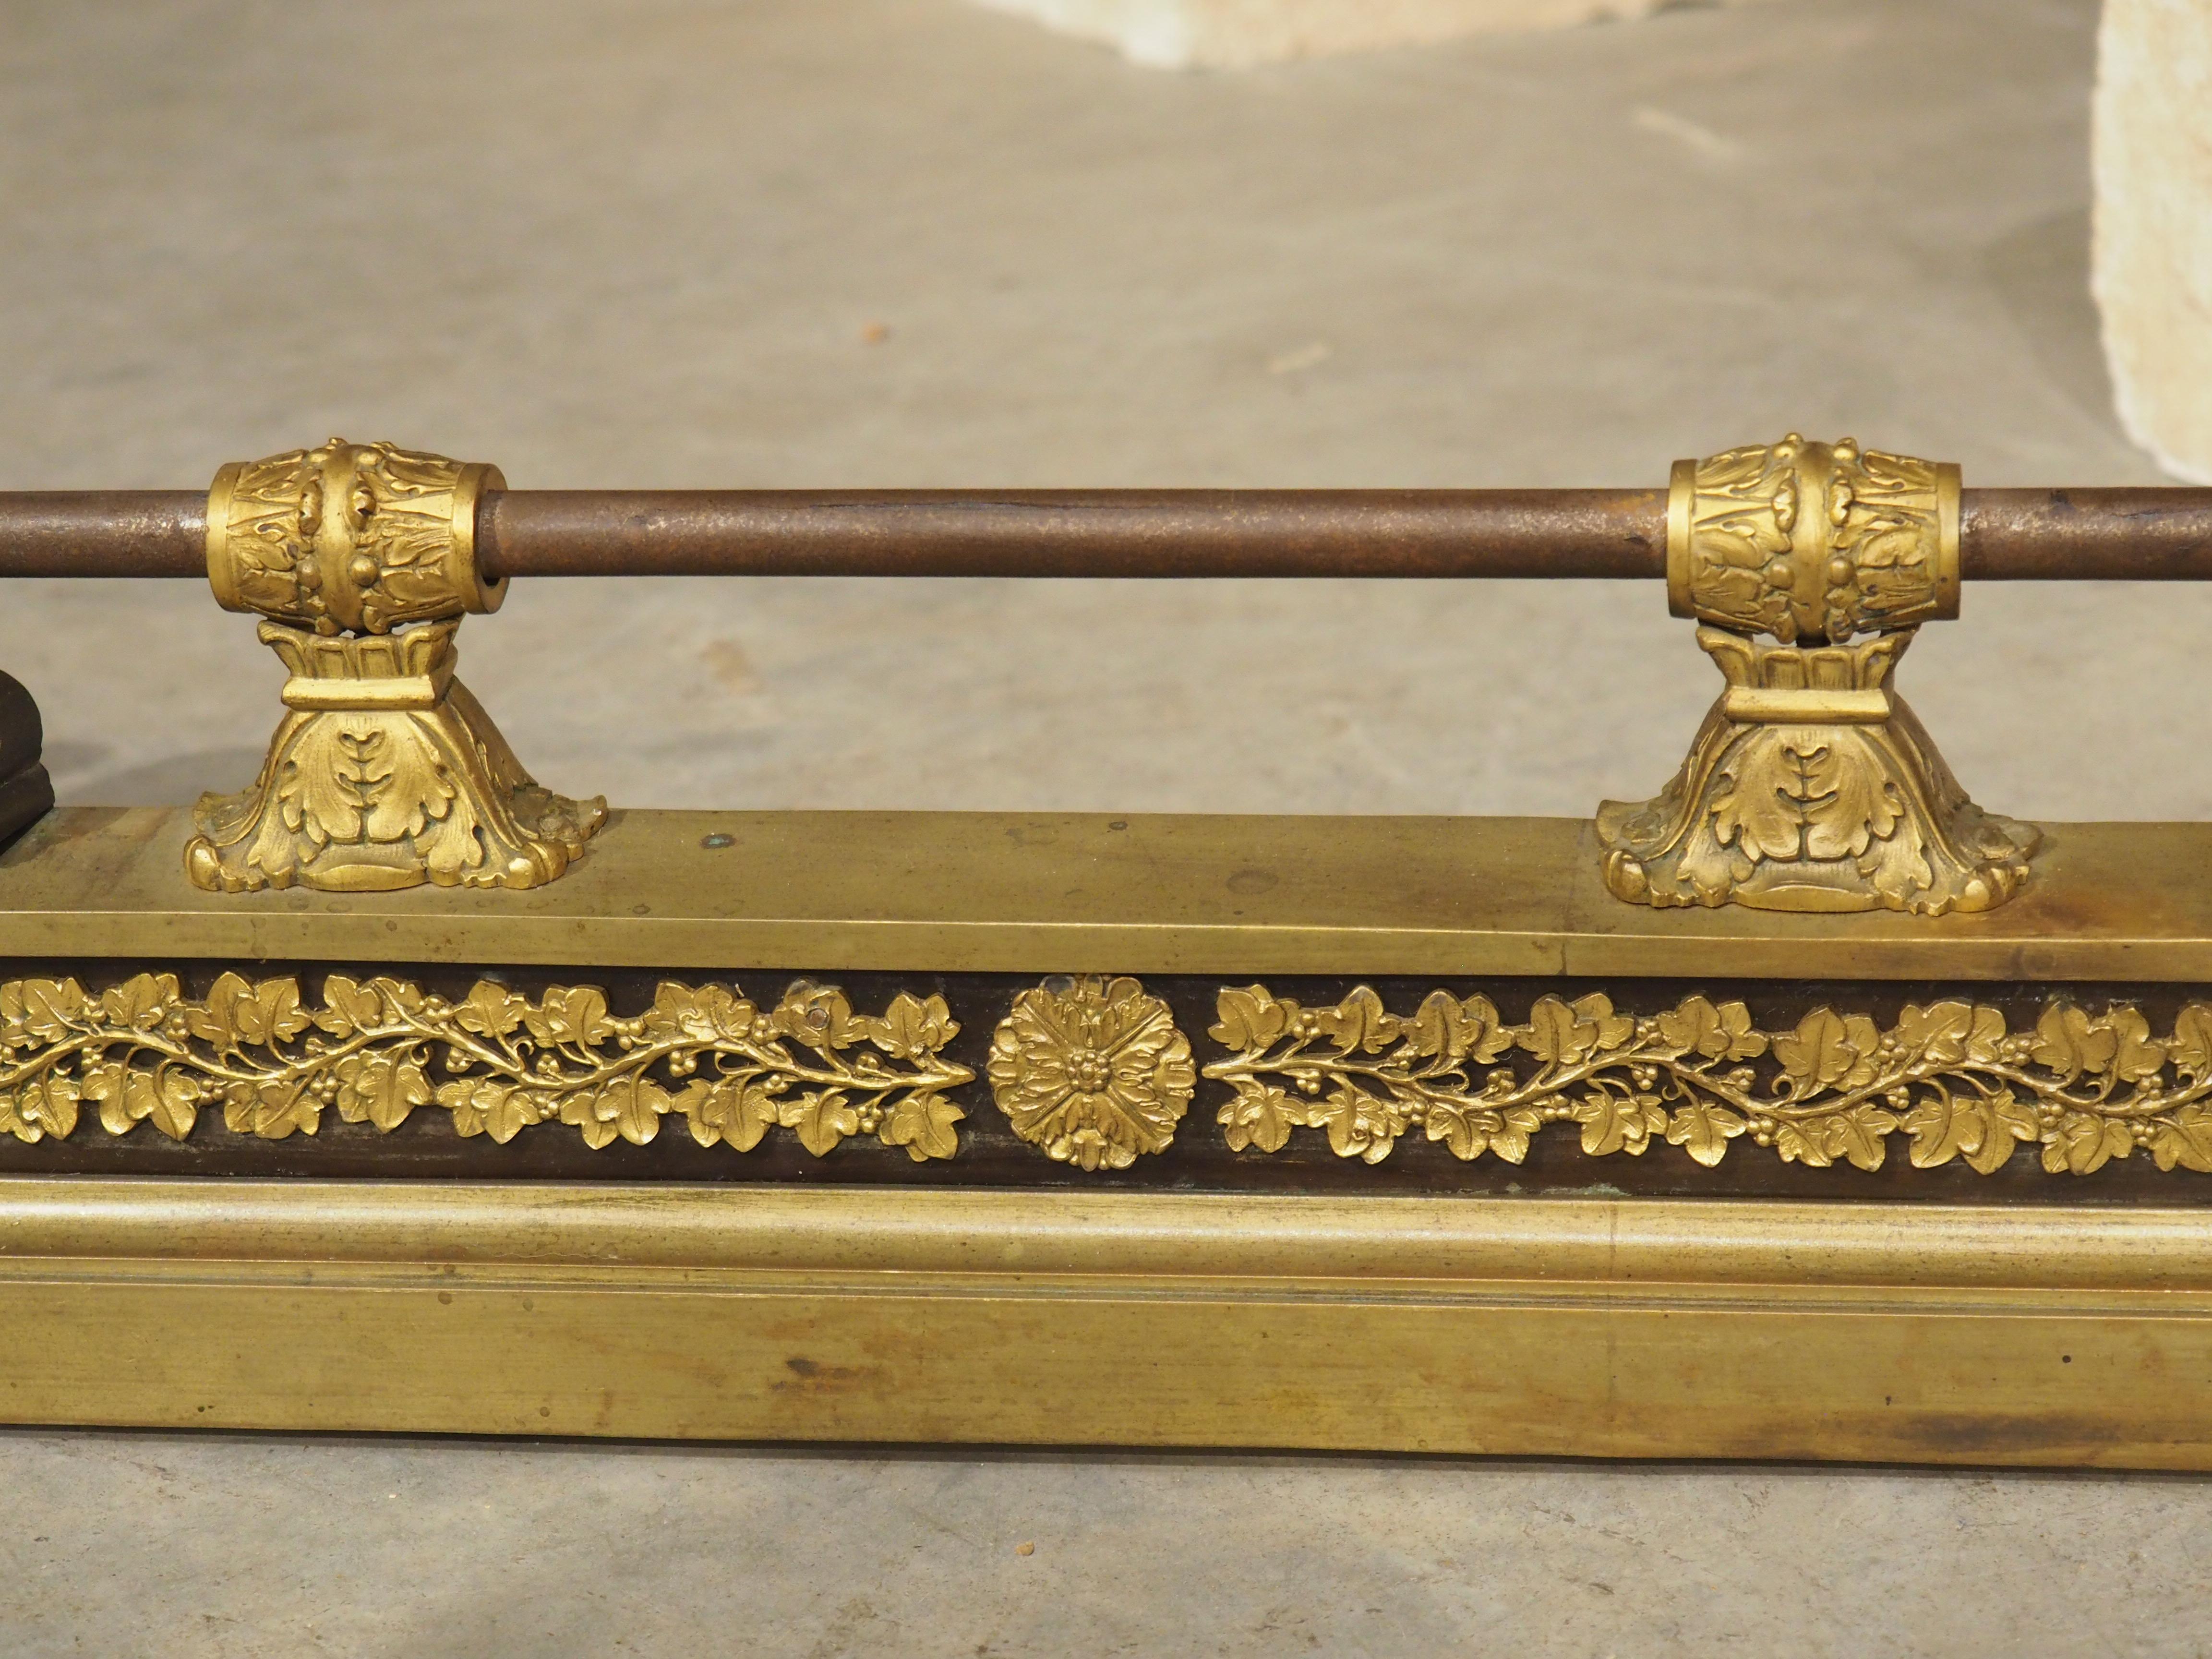 Period French Empire Patinated and Gilt Bronze Fireplace Fender, Circa 1815 For Sale 3